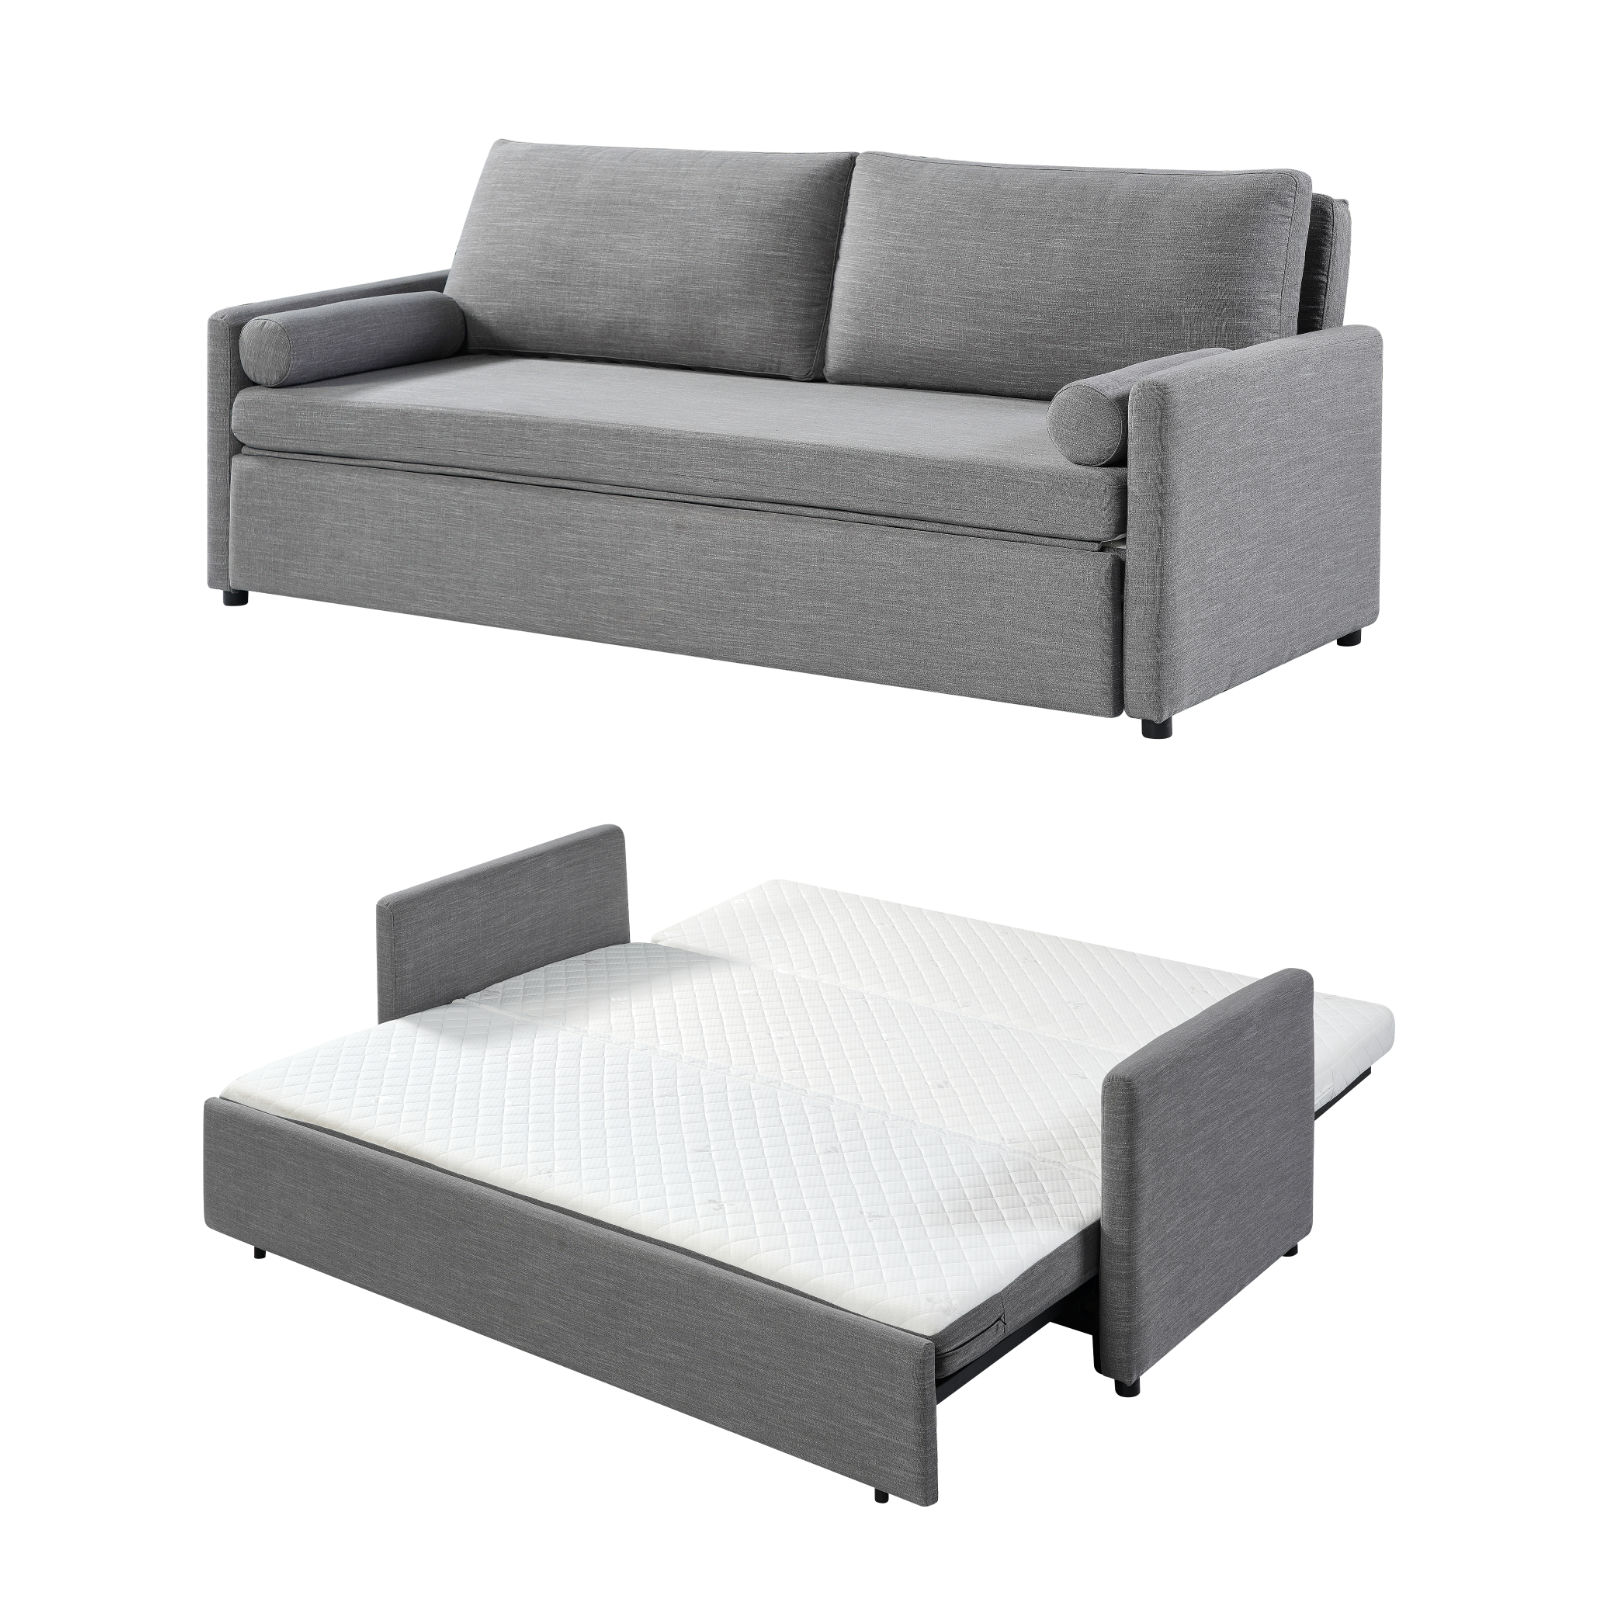 Sleeping On Sofa Xxx Video - Harmony - King Sofa bed with Memory Foam - Expand Furniture - Folding  Tables, Smarter Wall Beds, Space Savers